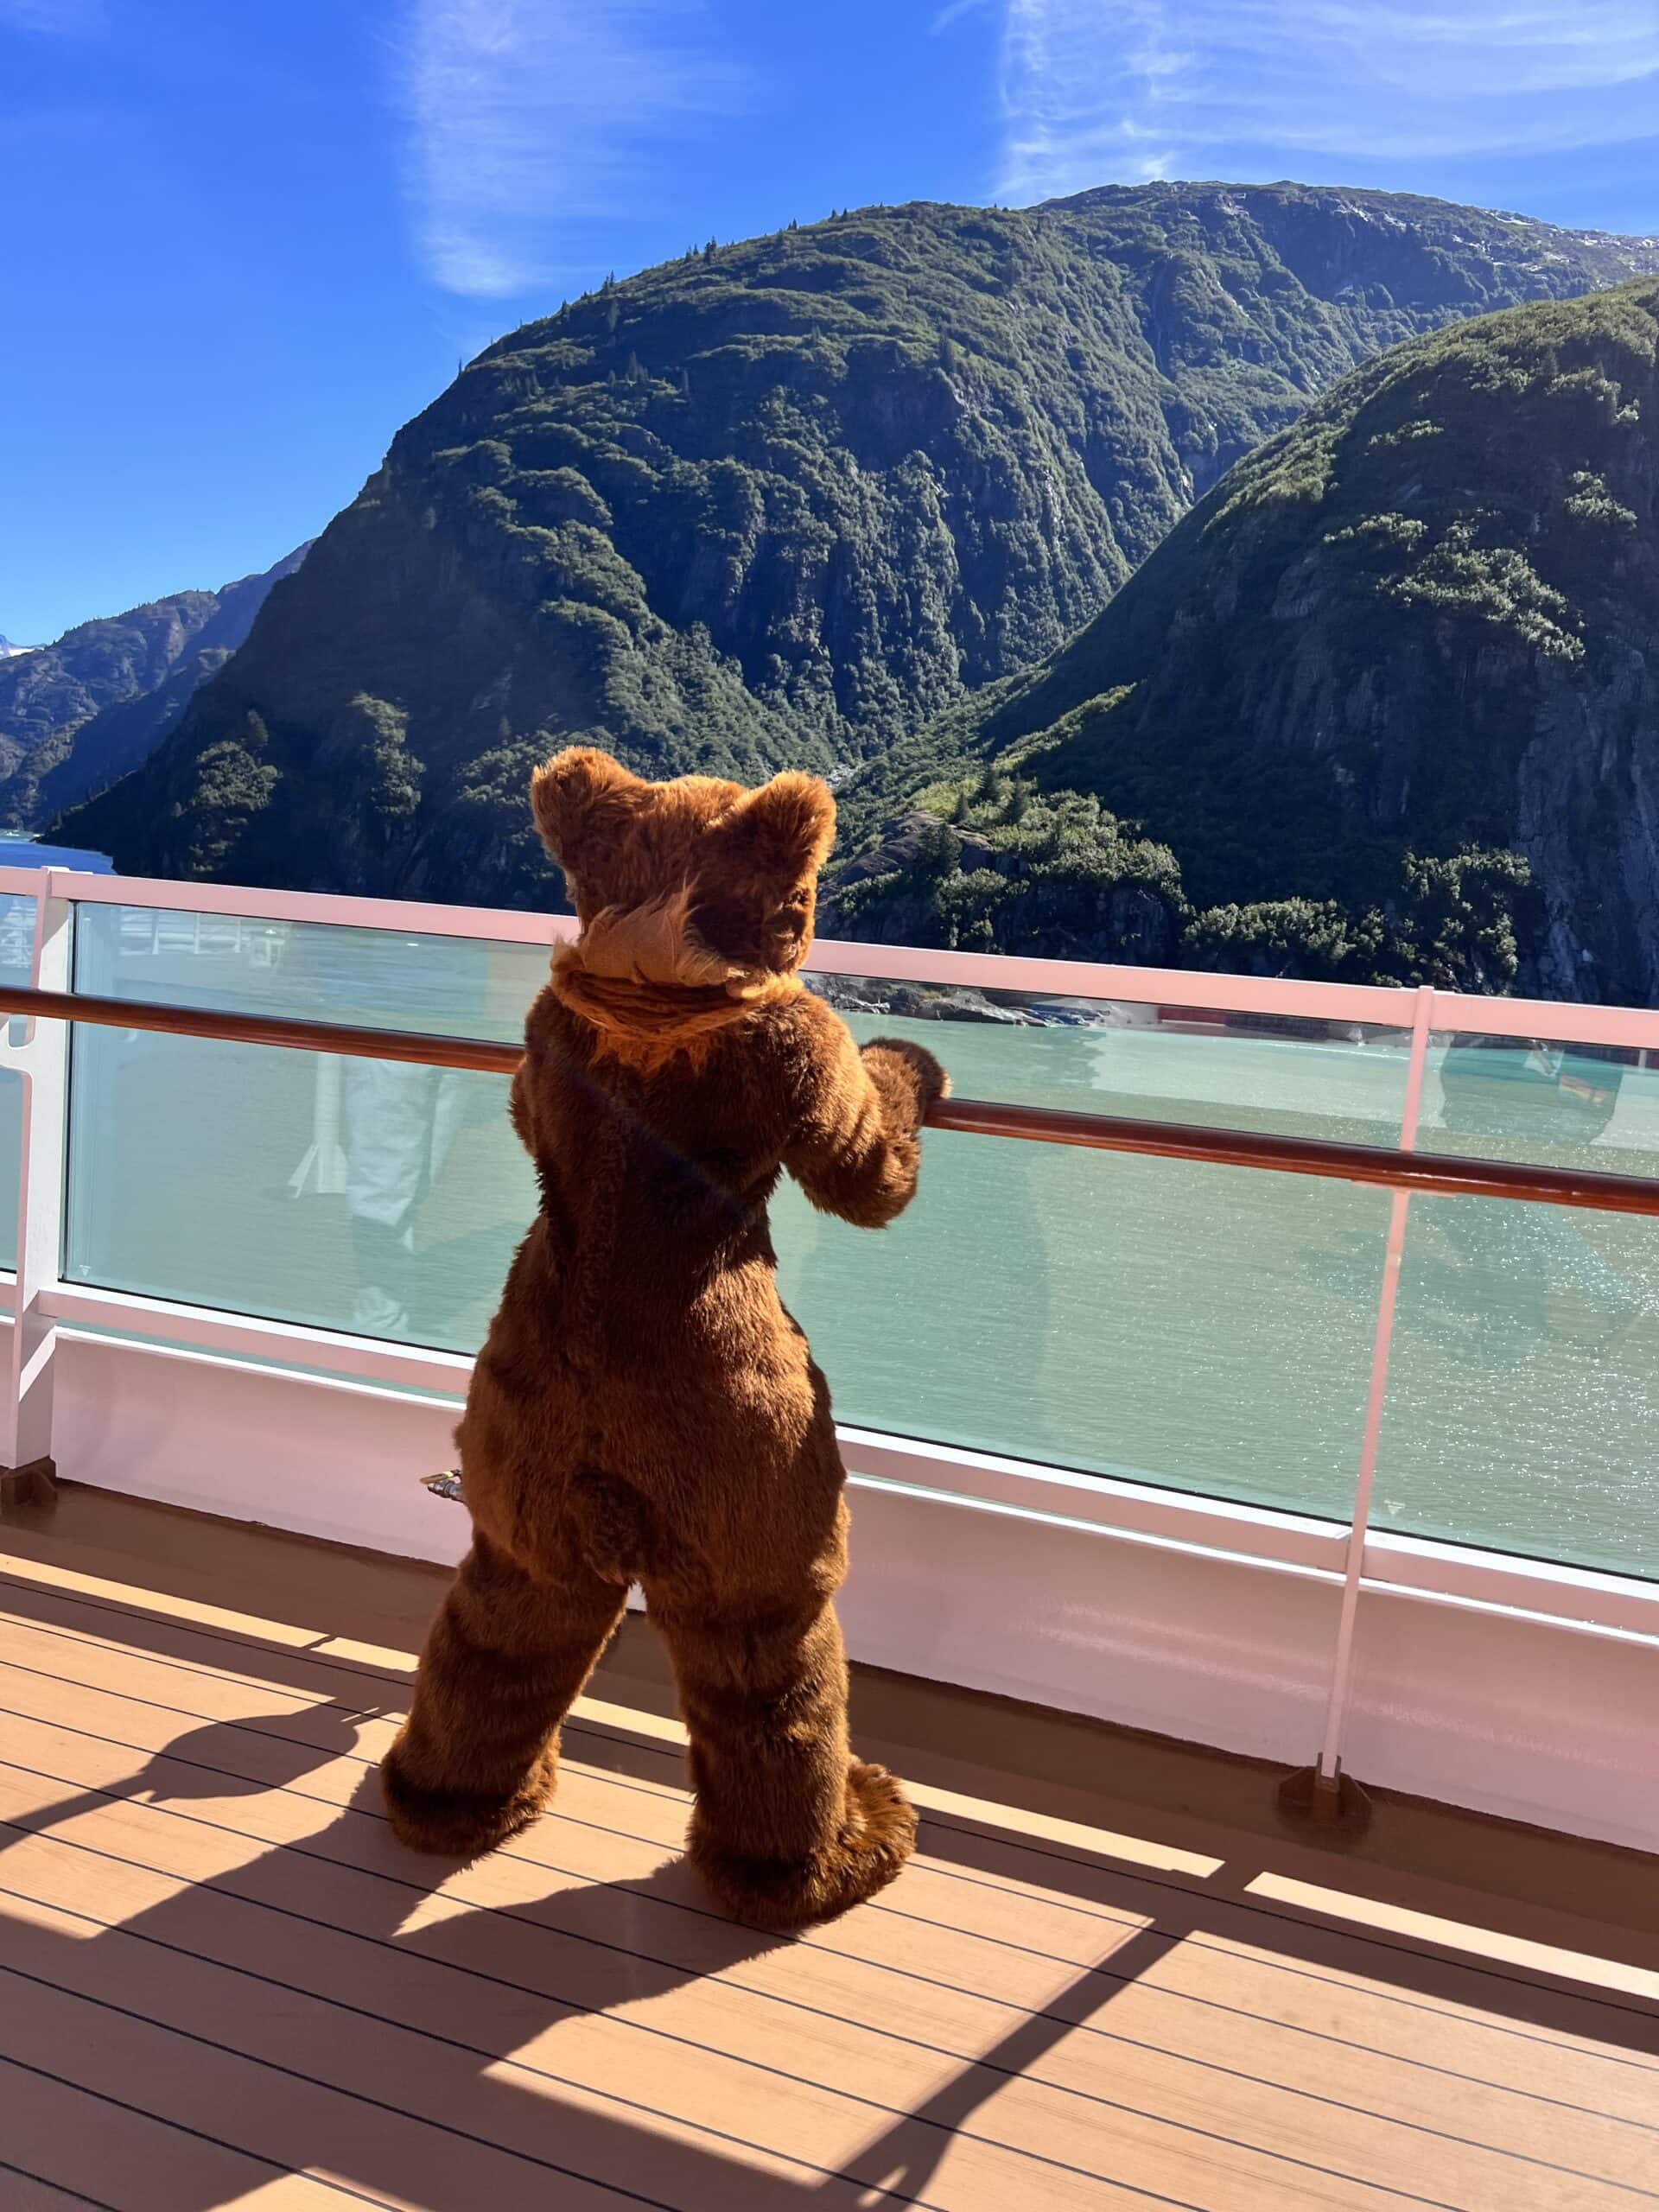 A costumed bear looking over the side of the Disney Wonder at the mountains in Alaska.